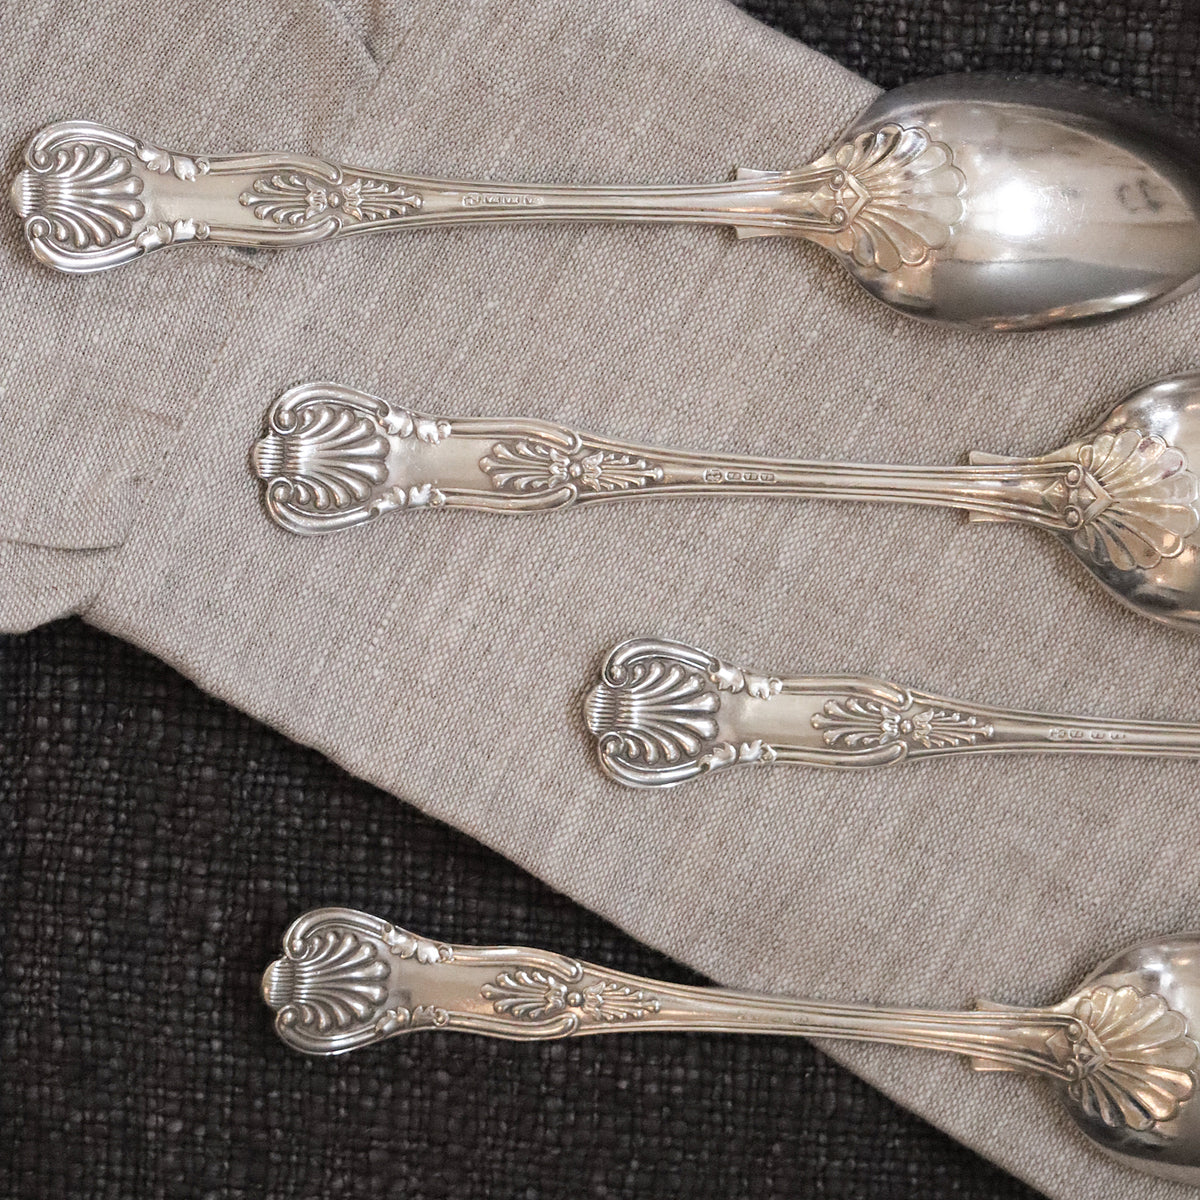 Kings Pattern Shell set of 4 spoons